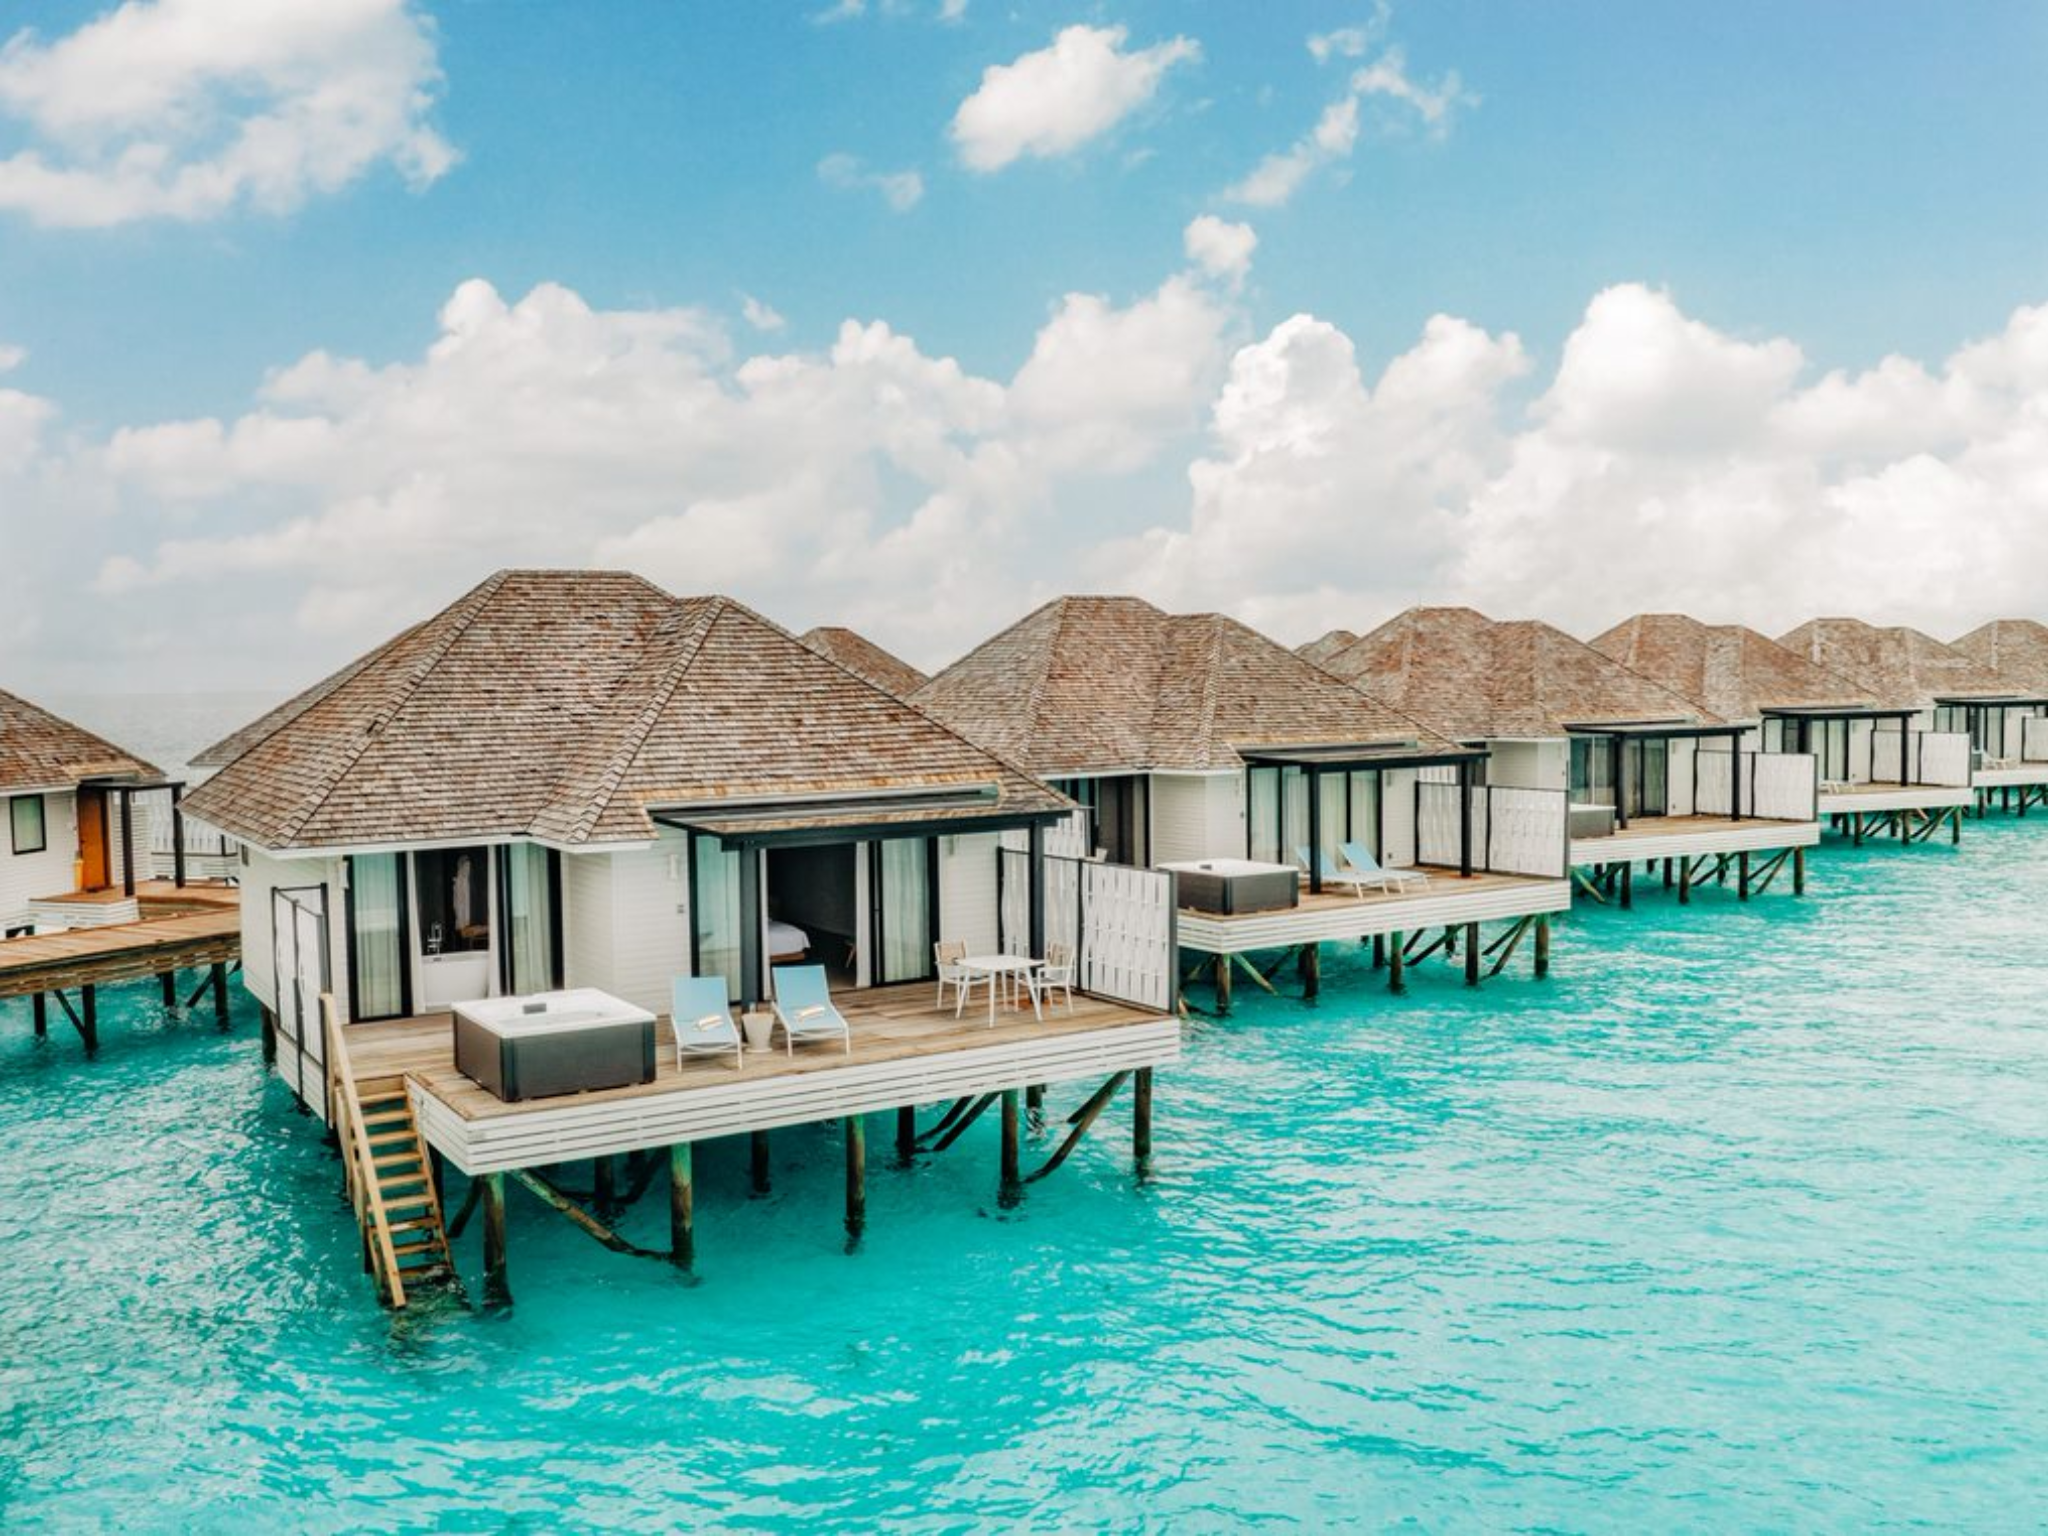 The water villas offer sunrise or sunset views